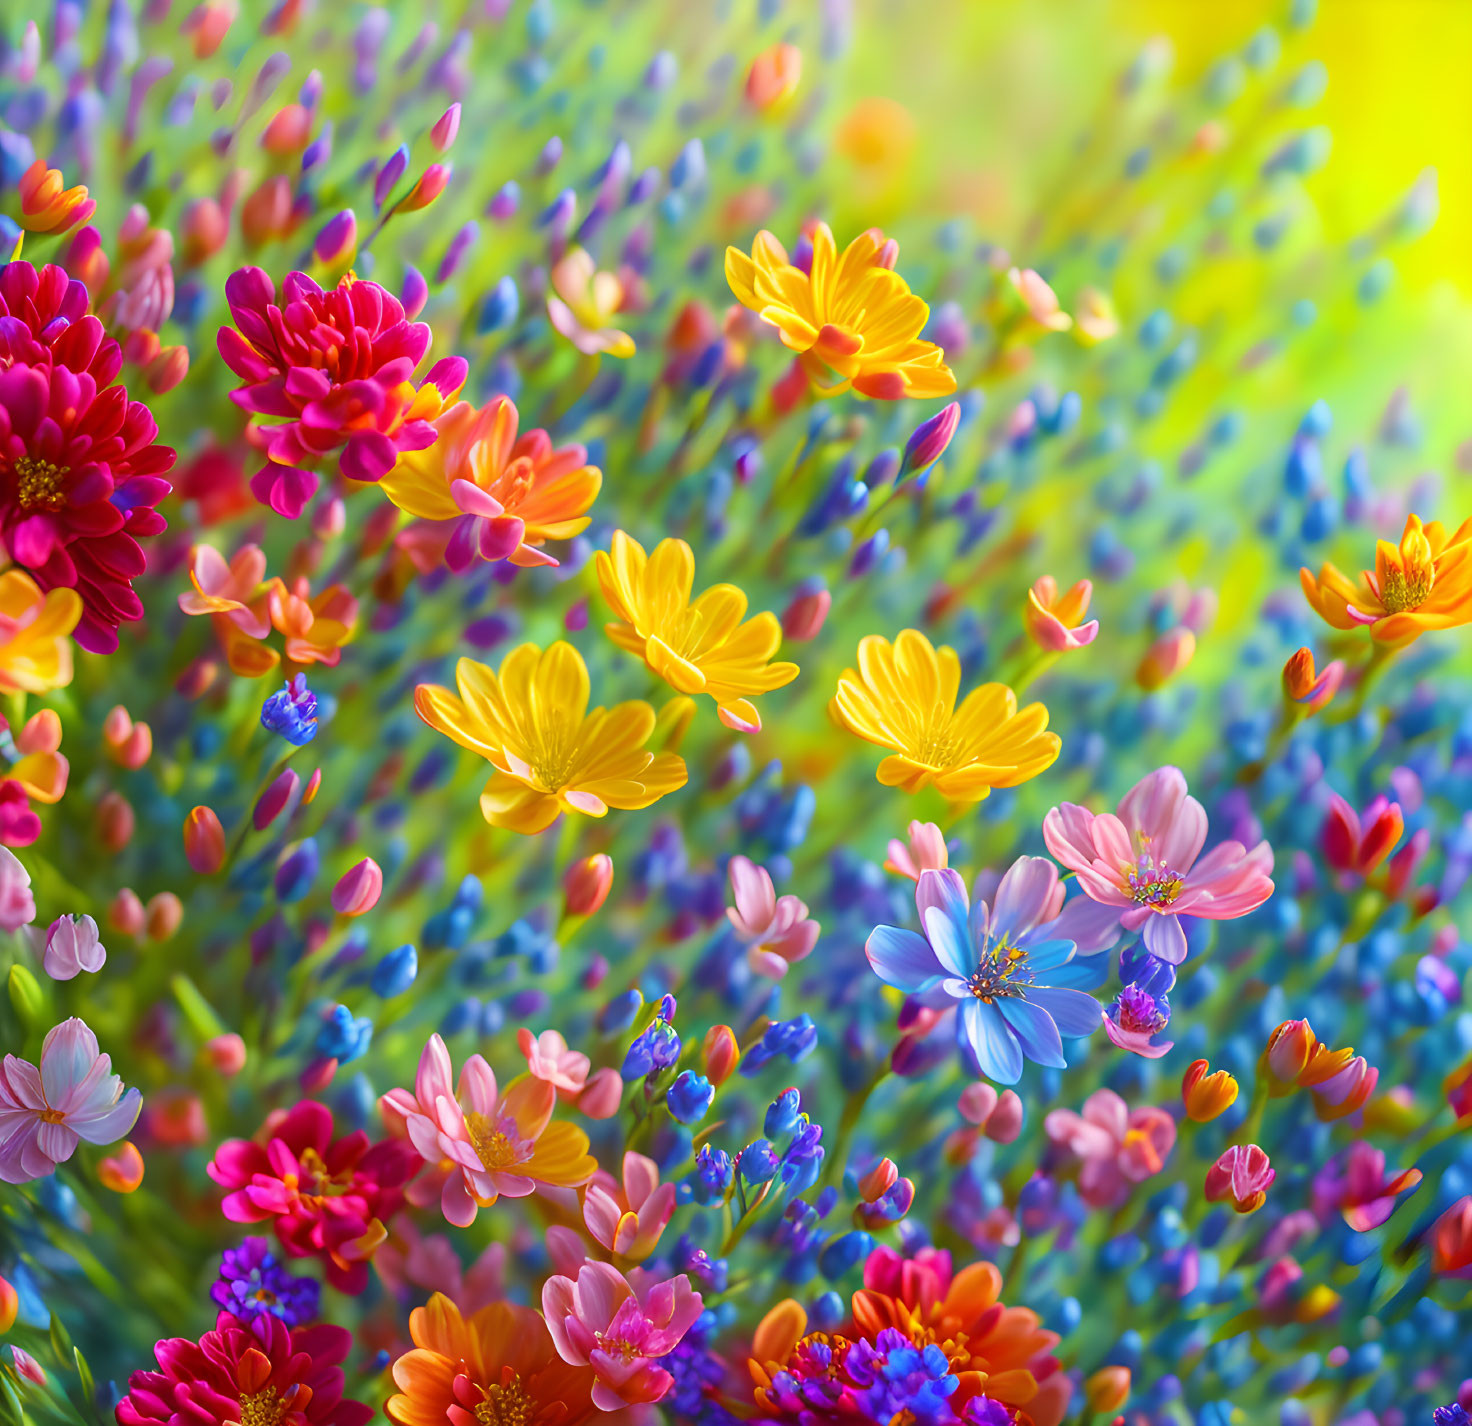 Multicolored flowers in red, yellow, and blue against a soft green backdrop